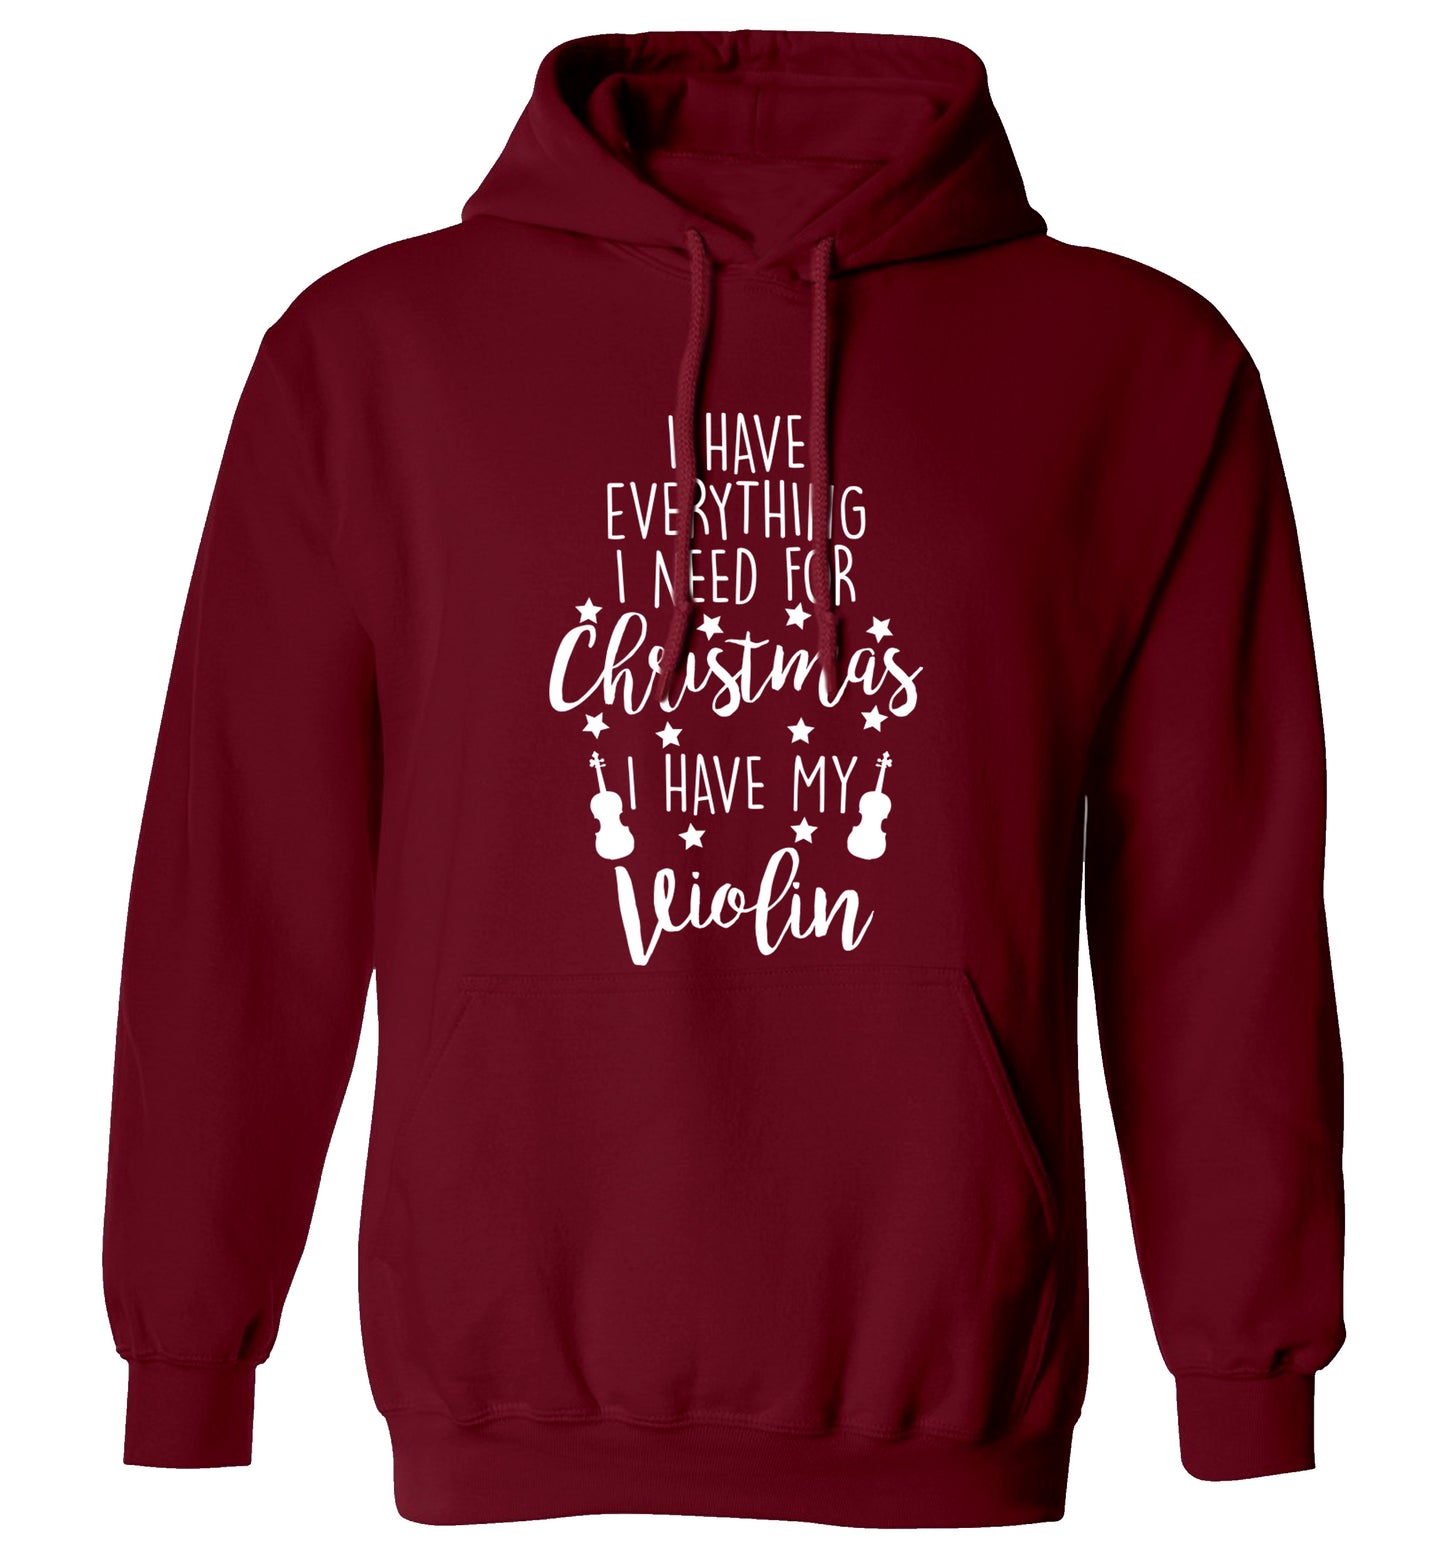 I have everything I need for Christmas I have my violin adults unisex maroon hoodie 2XL